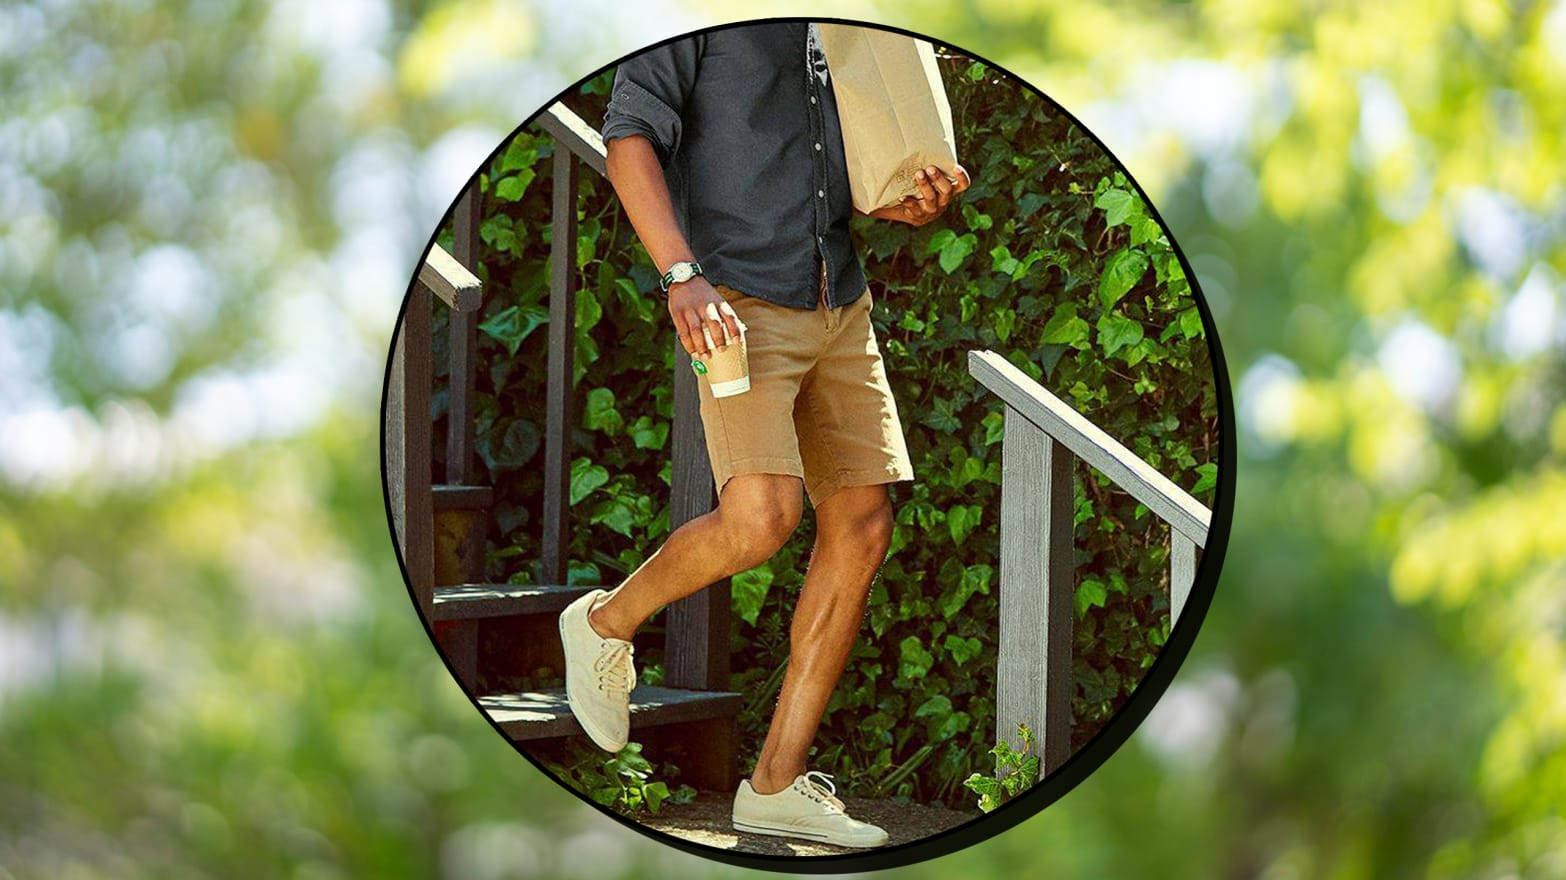 Huckberry Flint and Tinder 365 Shorts Review | Scouted, The Daily Beast